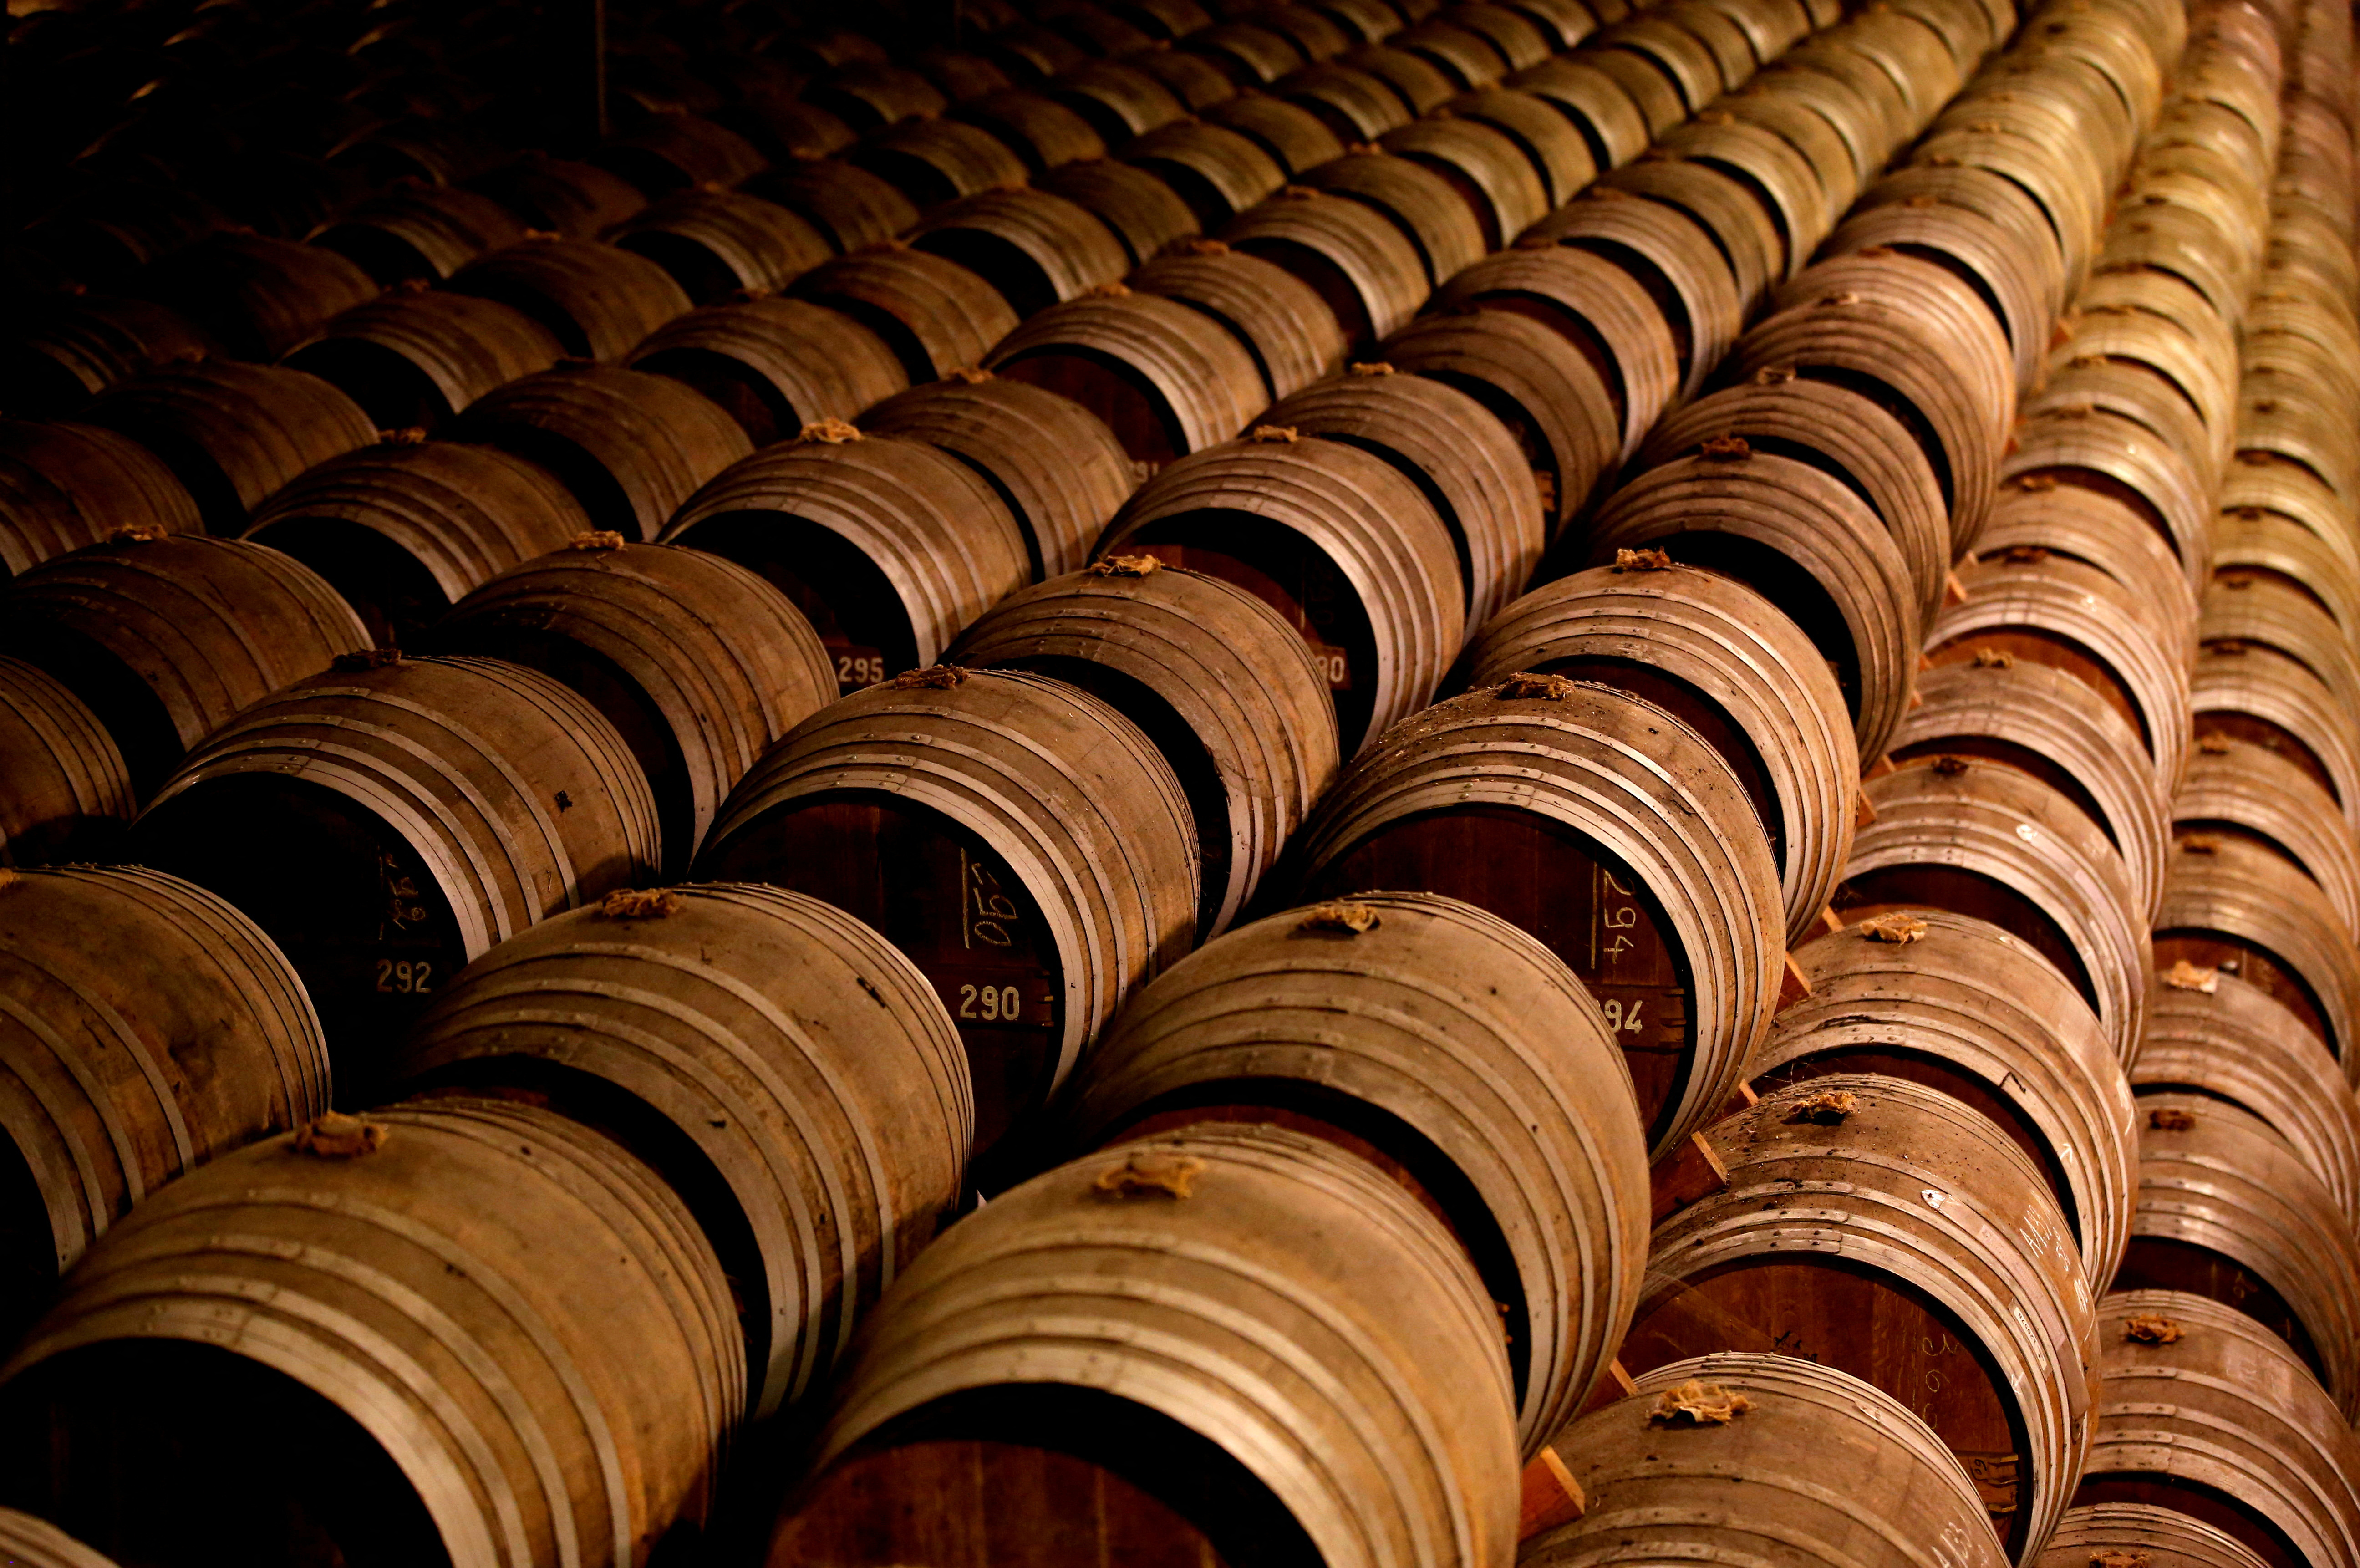 Oak barrels are stored in a cellar used for storing rare and old cognac at the Remy Martin factory in Cognac